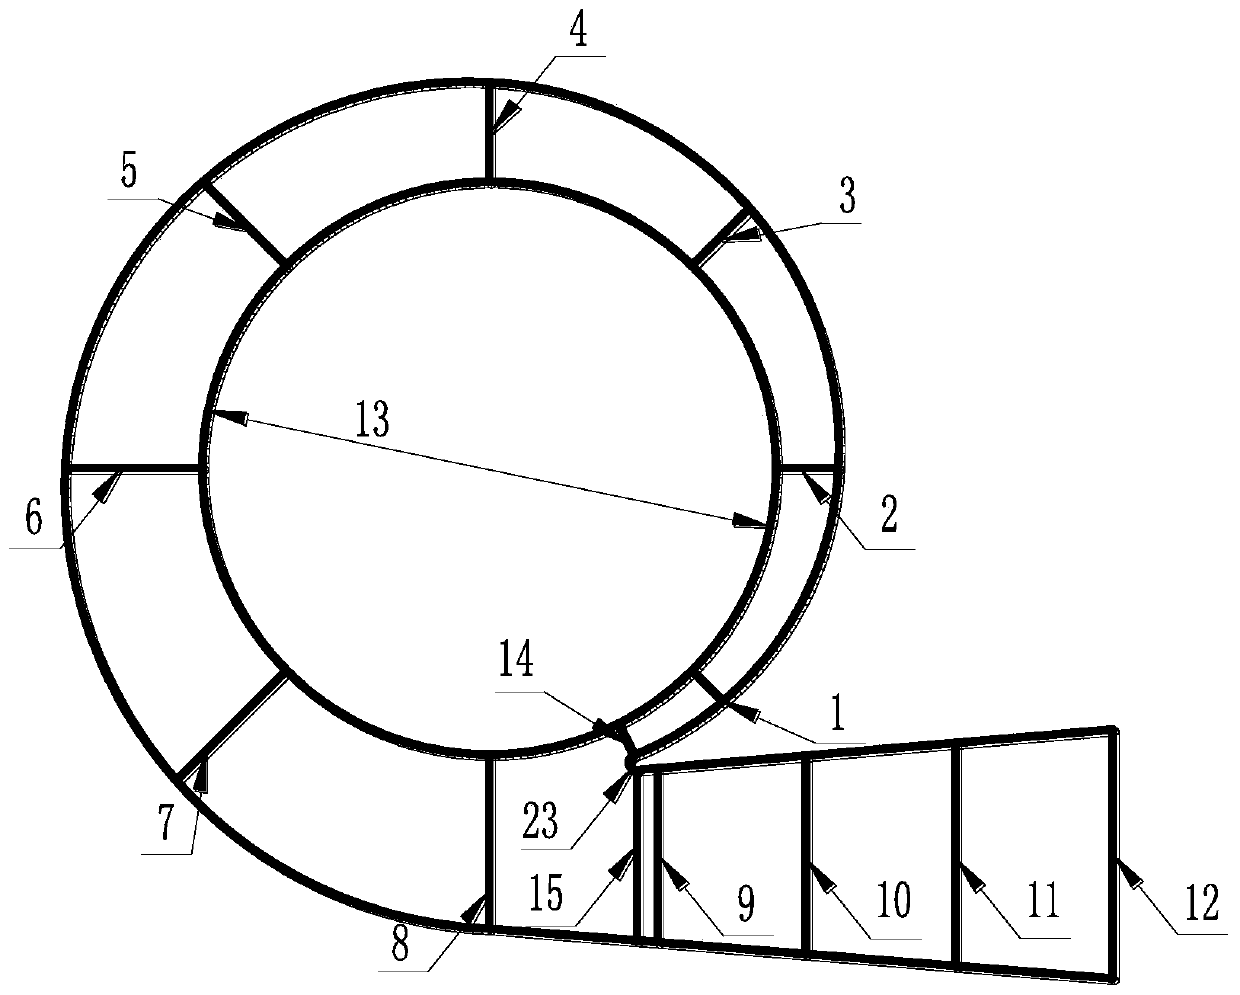 A Smooth Modeling Method for Centrifugal Pump Volute